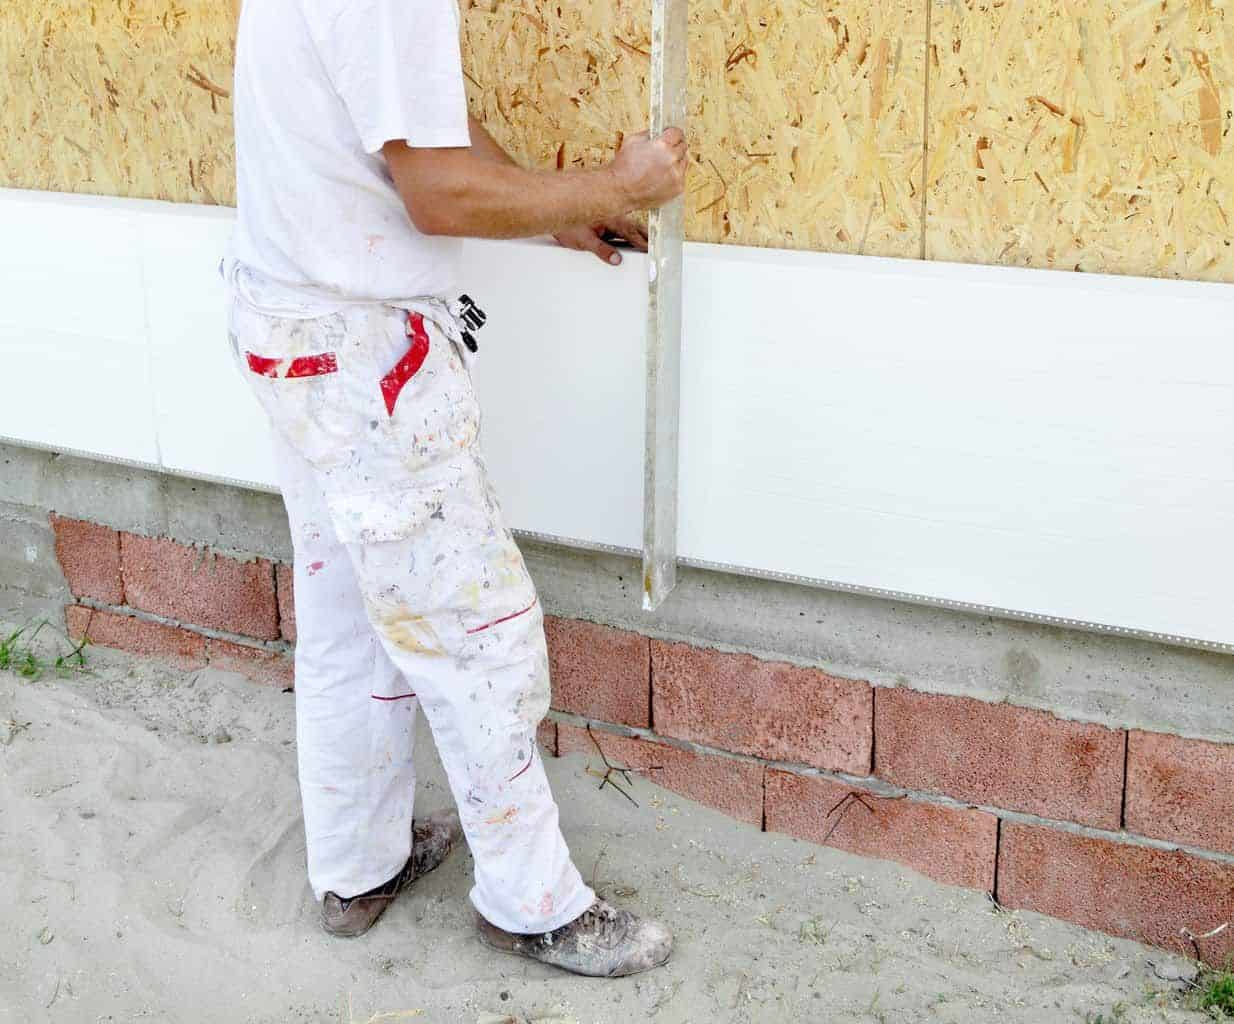 How To Install Foam Board Insulation On Exterior Walls